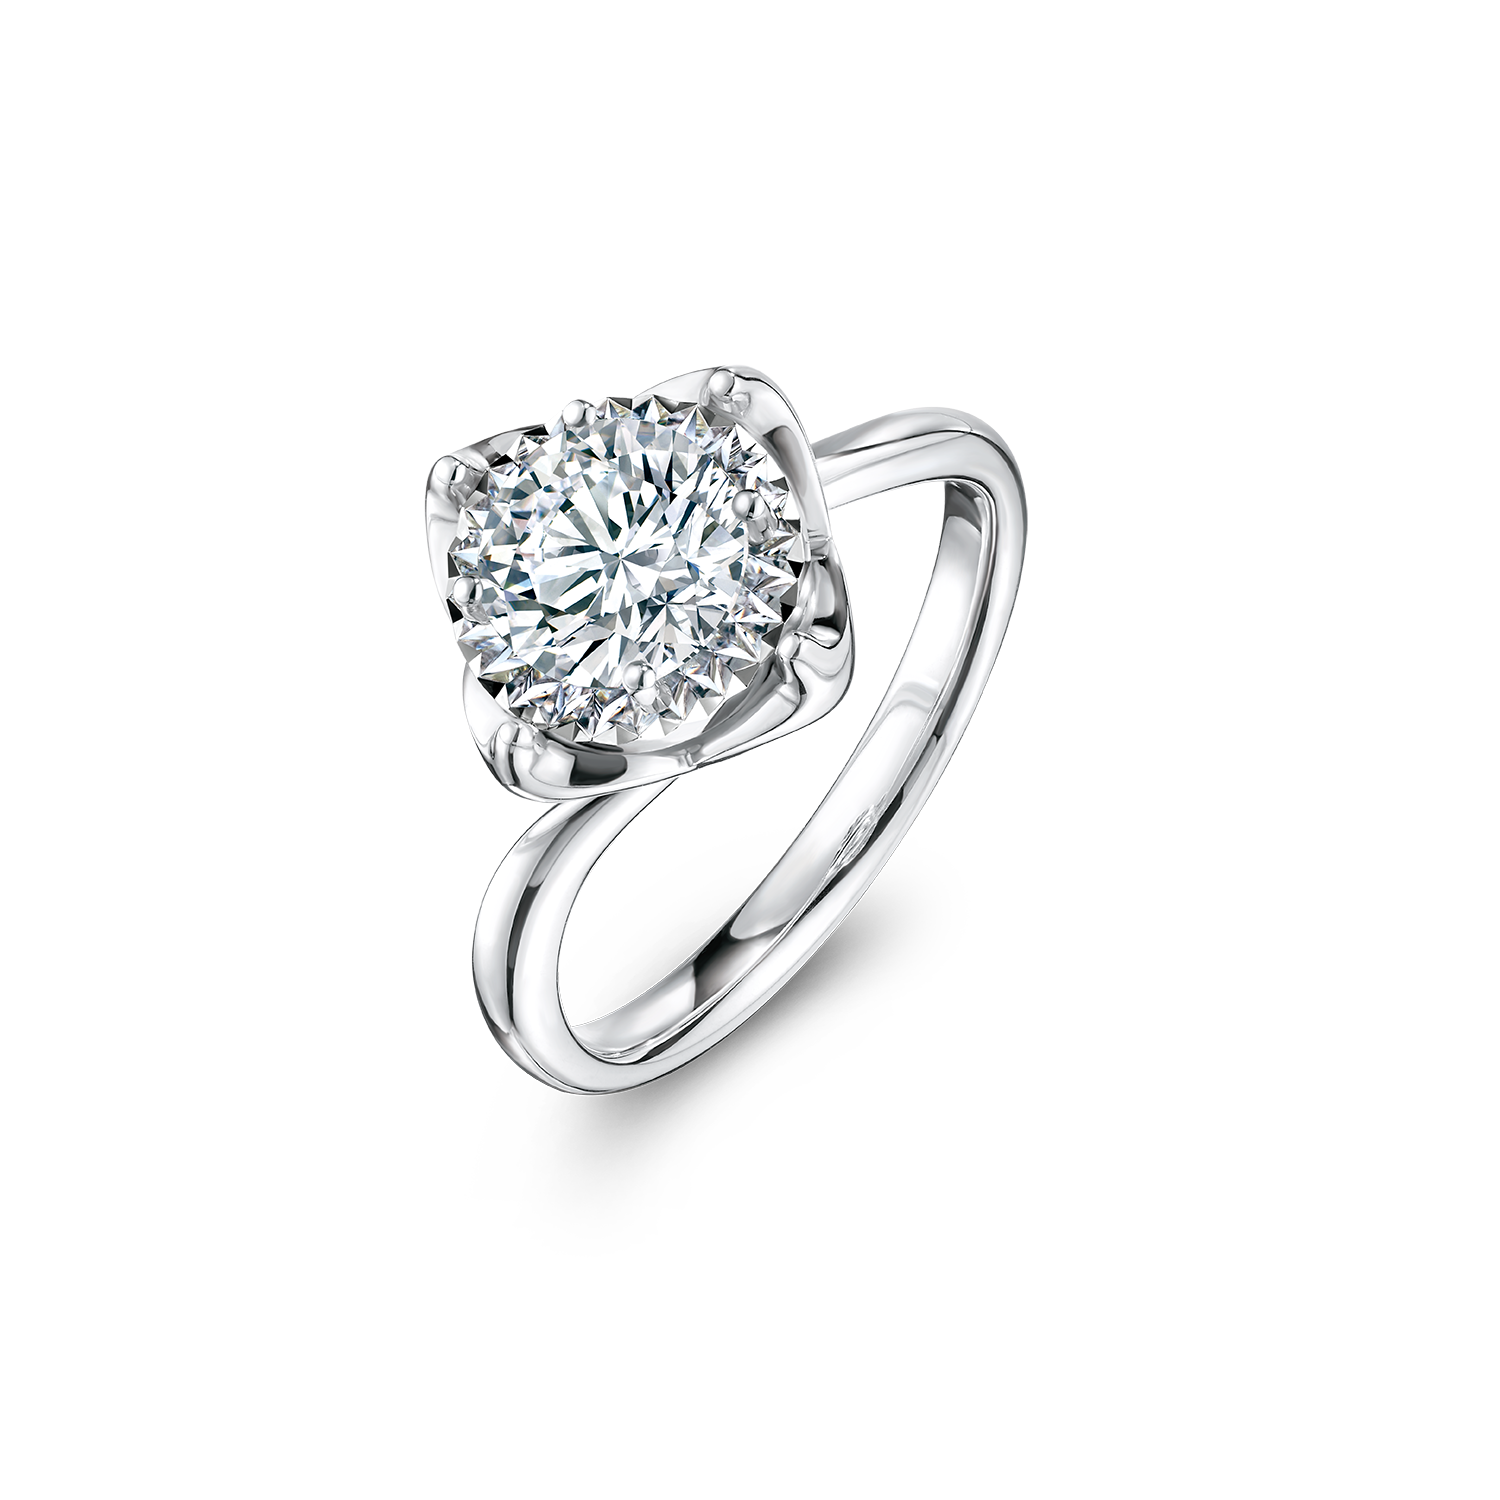 Star Blossom Ring, White Gold And Diamonds - Categories